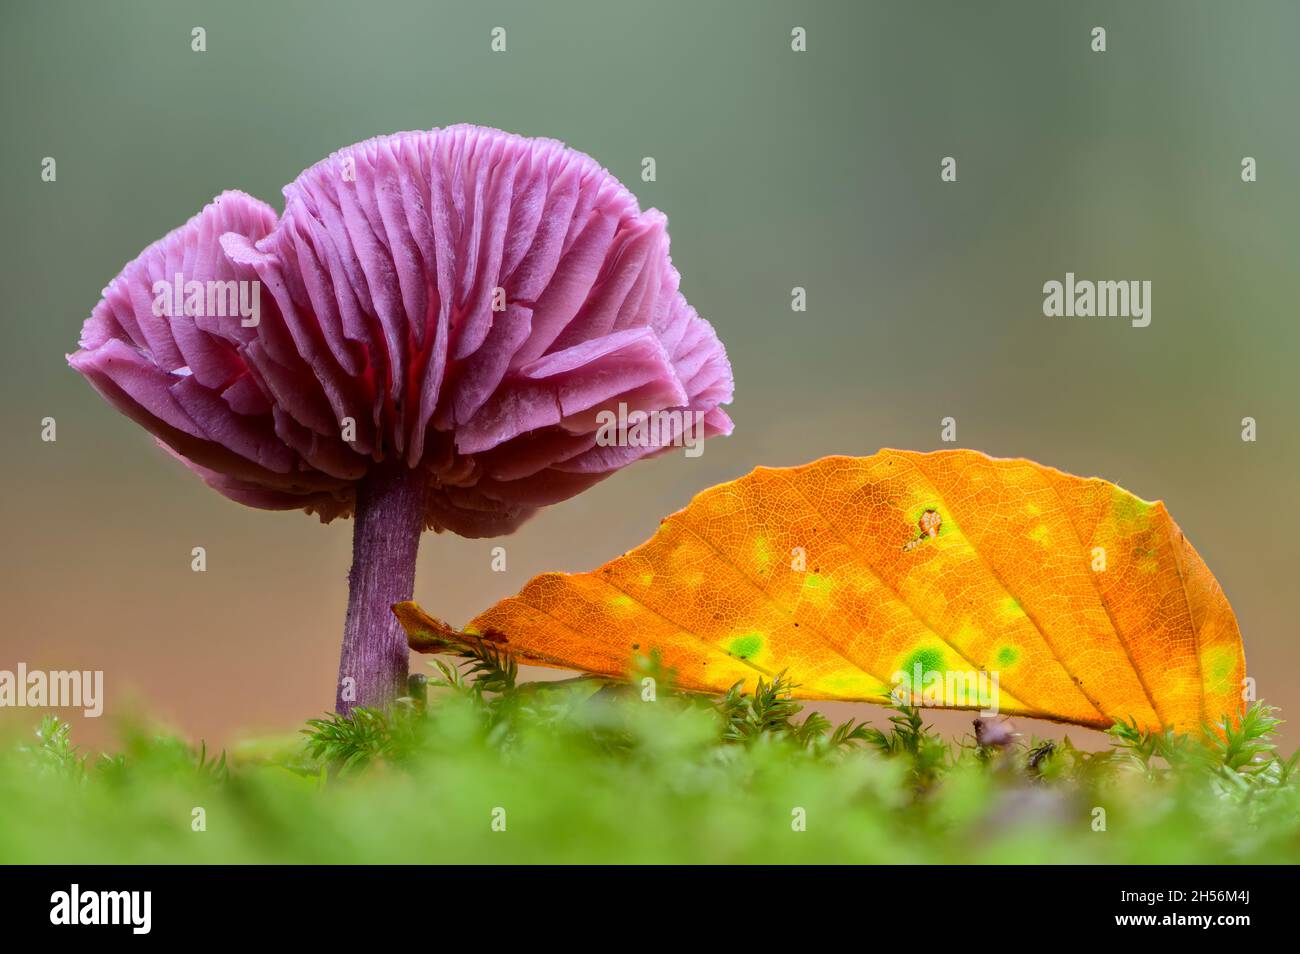 Amethyst deceiver with a fallen autumn leave Stock Photo